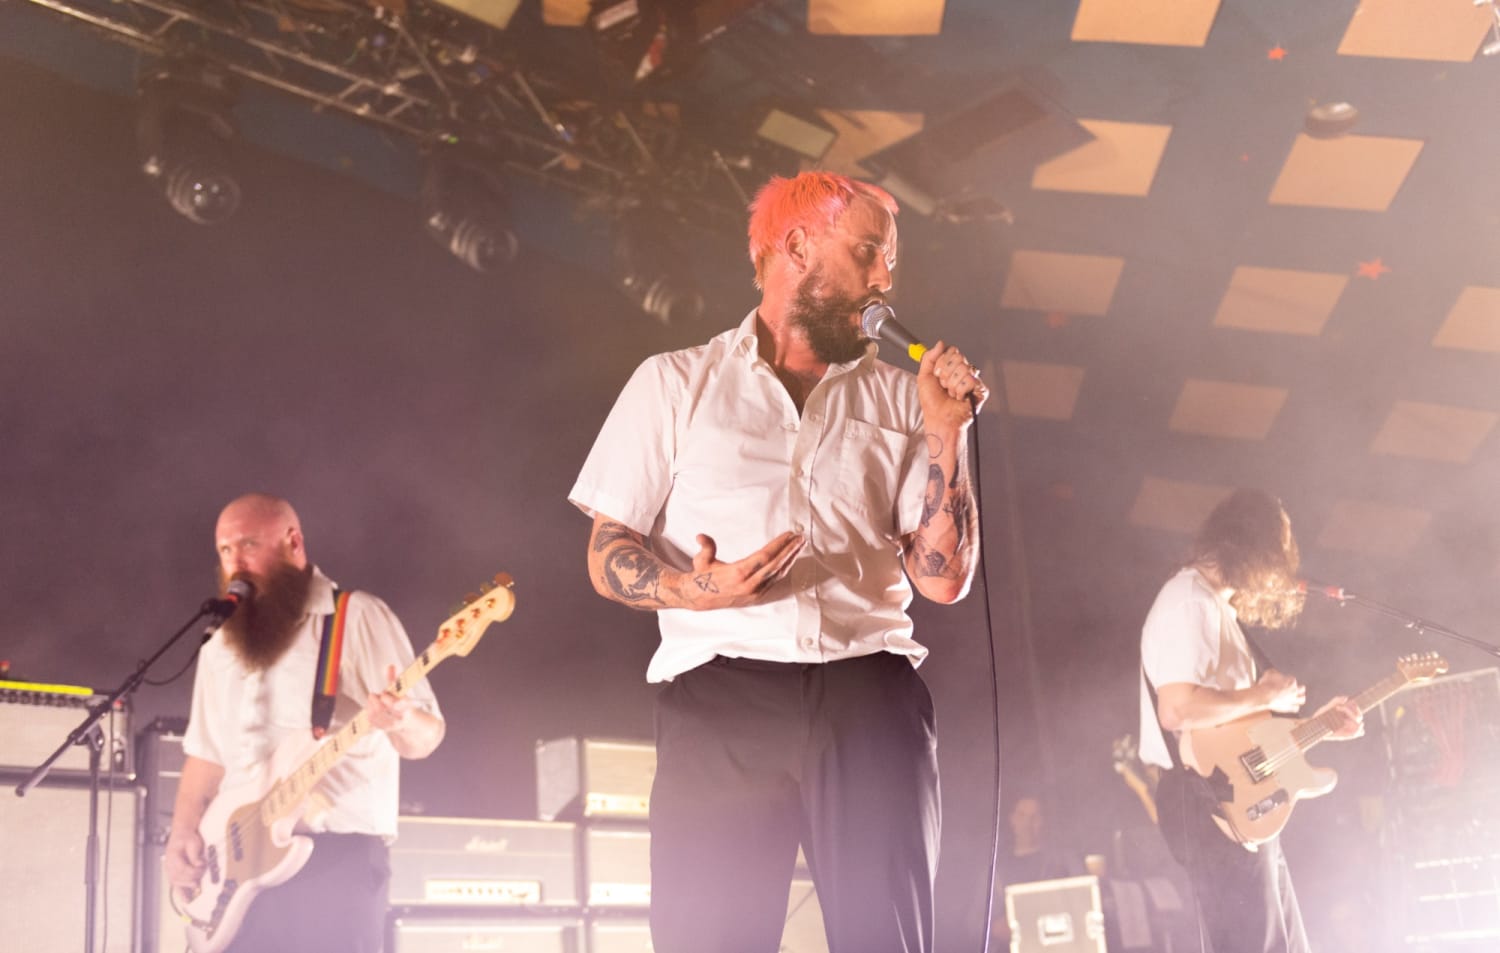 IDLES direct fans to virtual protest in support of Black Lives Matter